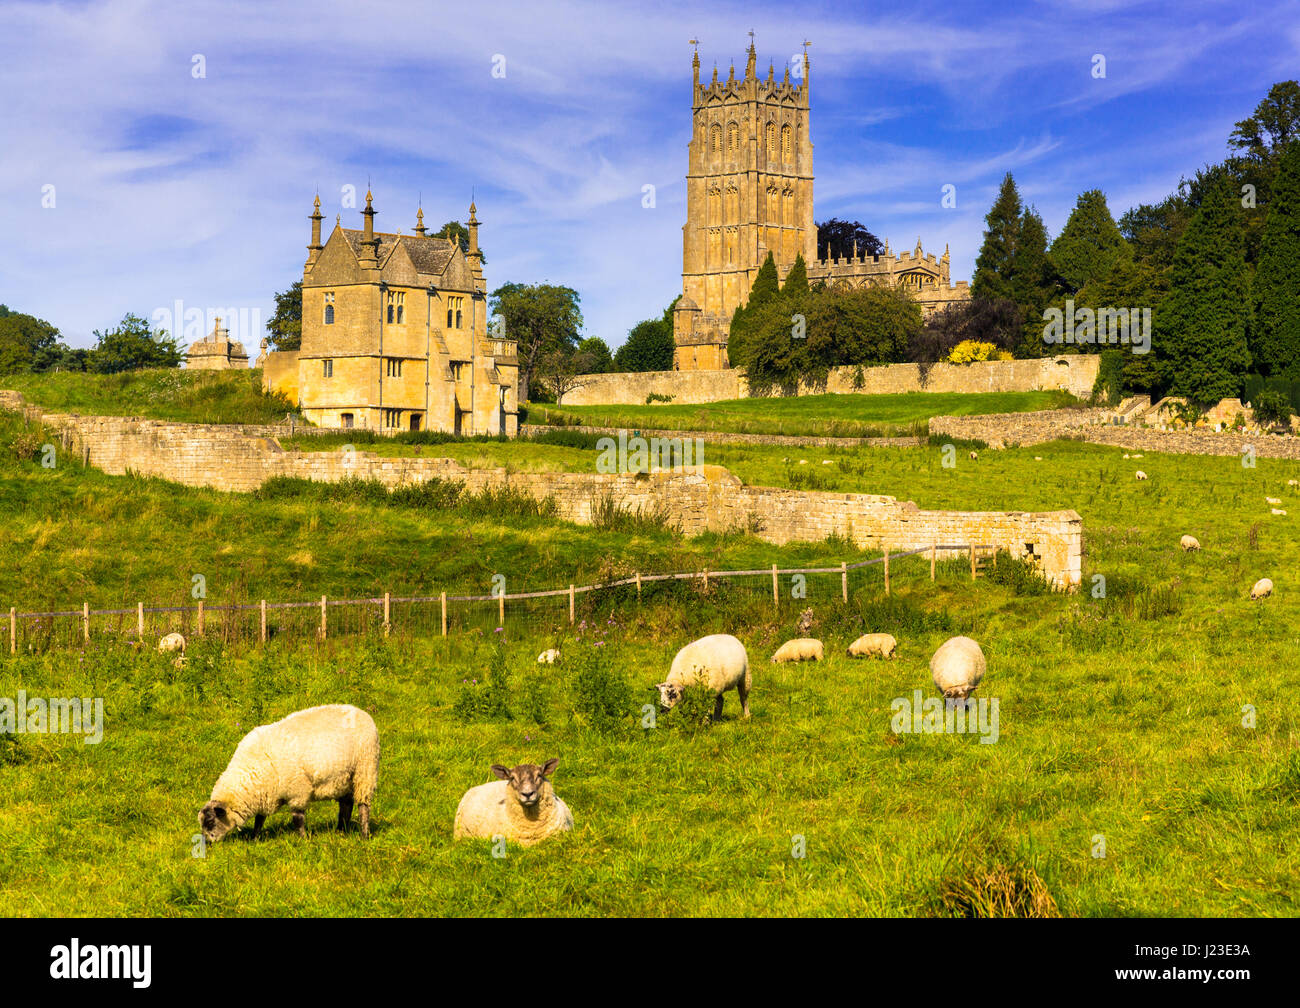 Chipping Campden Church seen across meadow with sheep in old Cotswold town of Chipping Campden, Cotswolds, UK Stock Photo